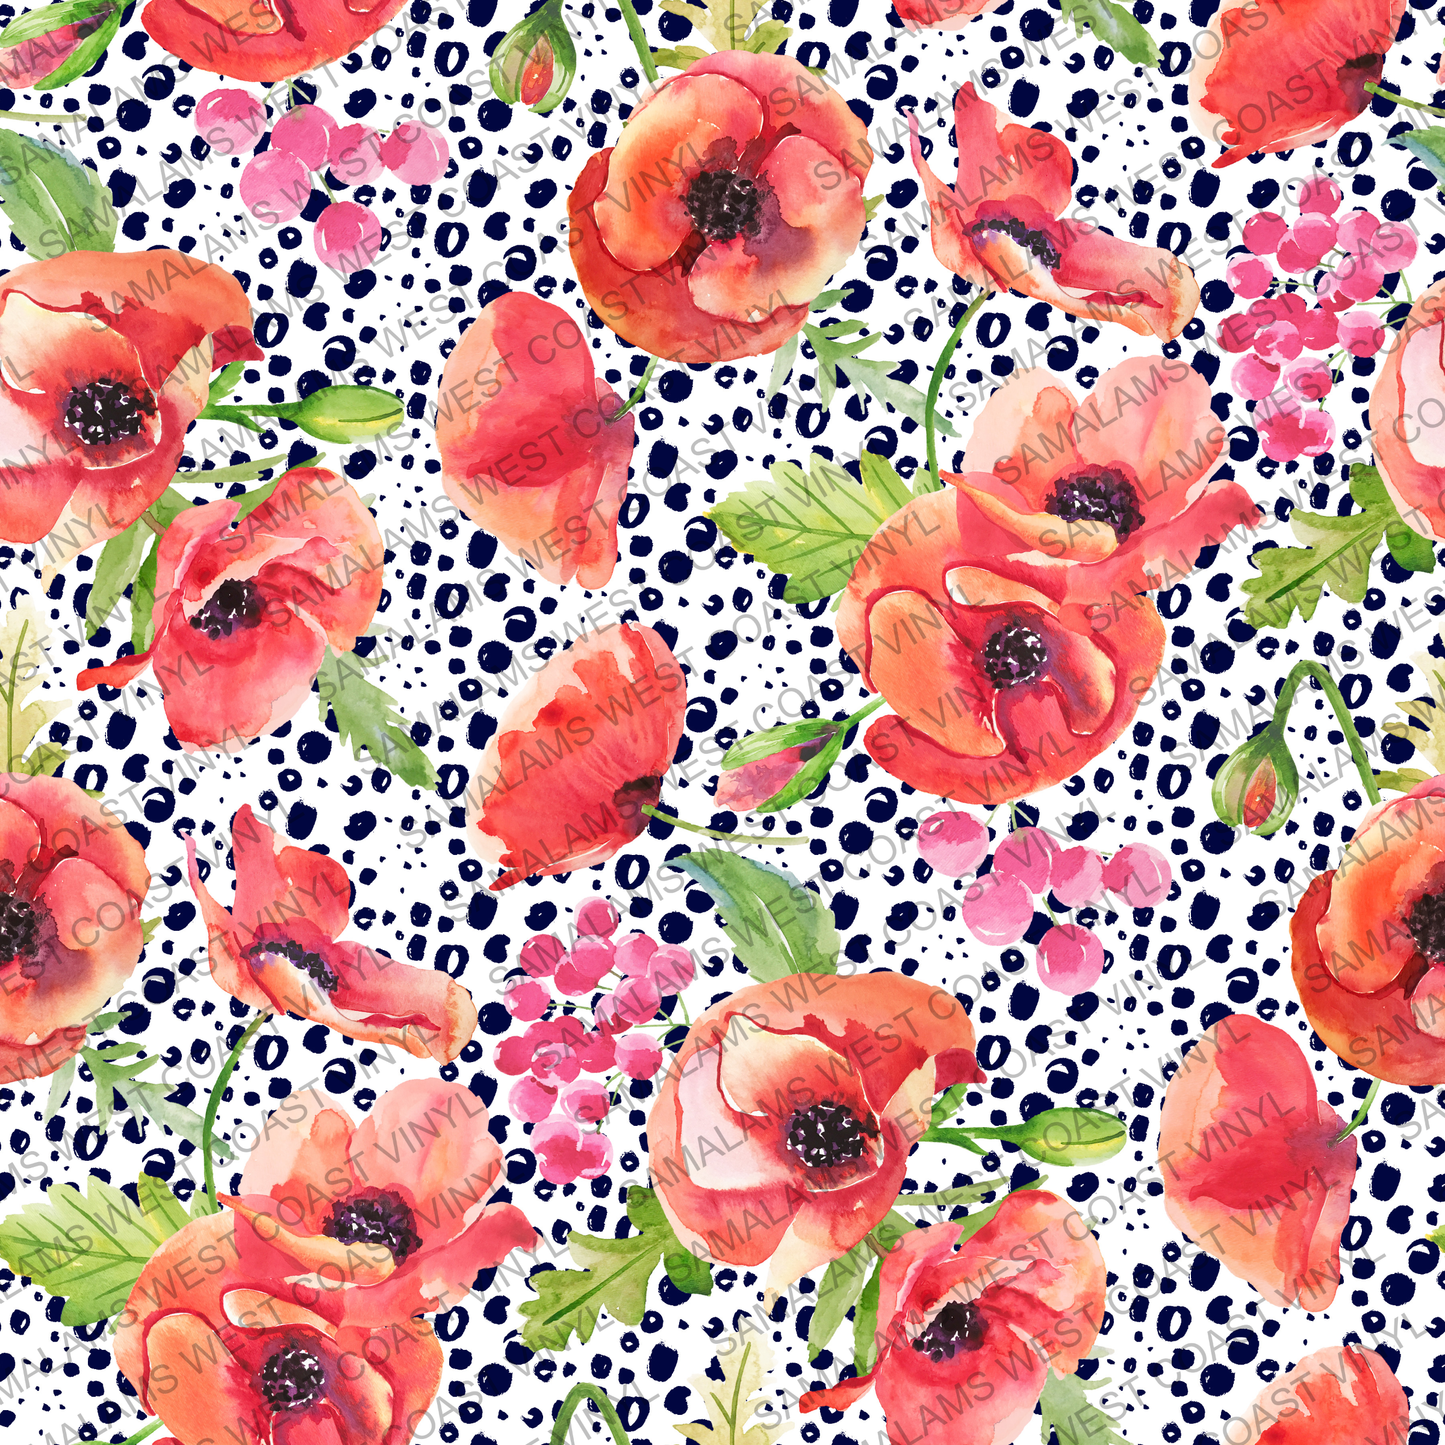 Floral - Pack 4 (Seamless)